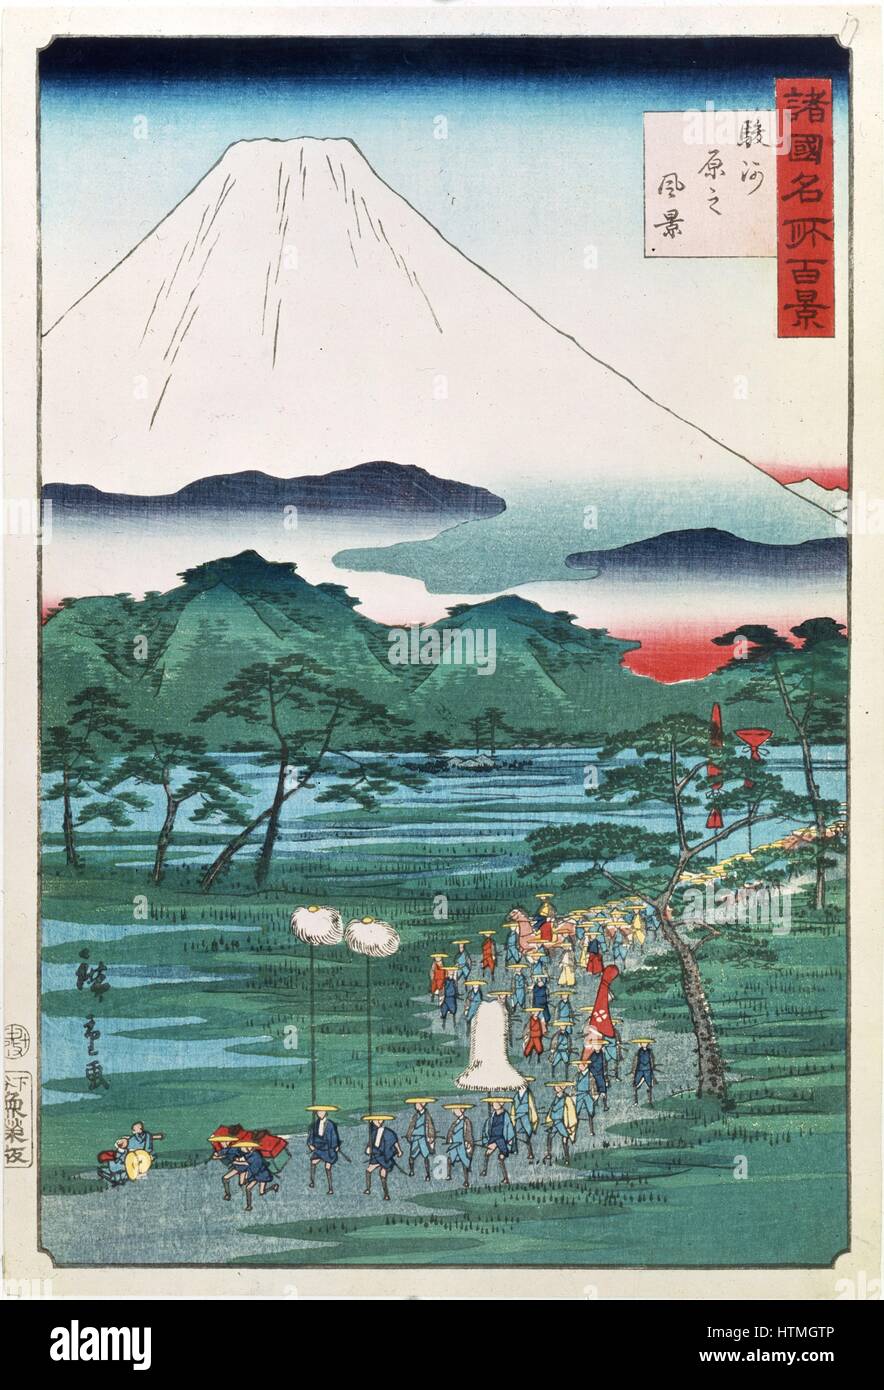 Mount Fuji seen from Hara Province in Suruga', 1860. Landscape with Mount Fuji, Japan's highest peak dominating the background , forest and lakes, centre. A procession makes its way along the road from the mountain. Coloured woodblock print. Hiroshige II Stock Photo